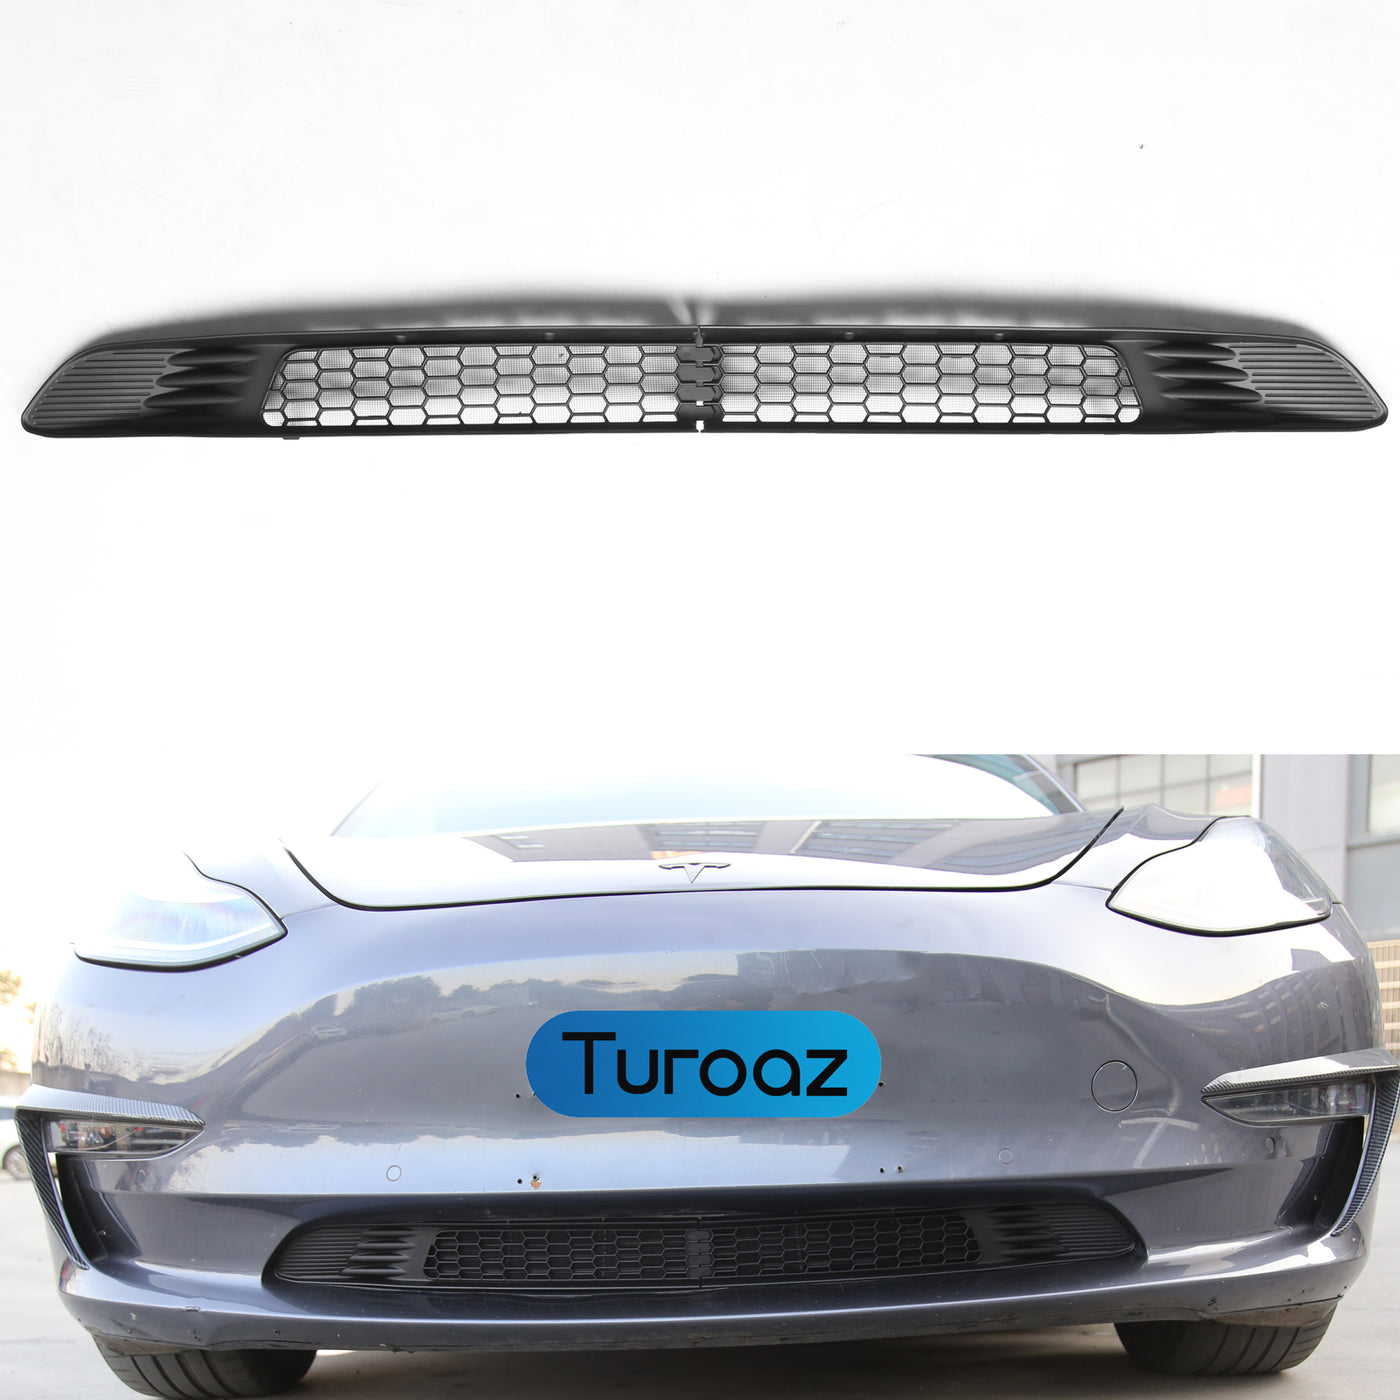 Segmented Front Grill Mesh Installation - Tesla 2024 Model 3 Highland  Accessory by Arcoche 